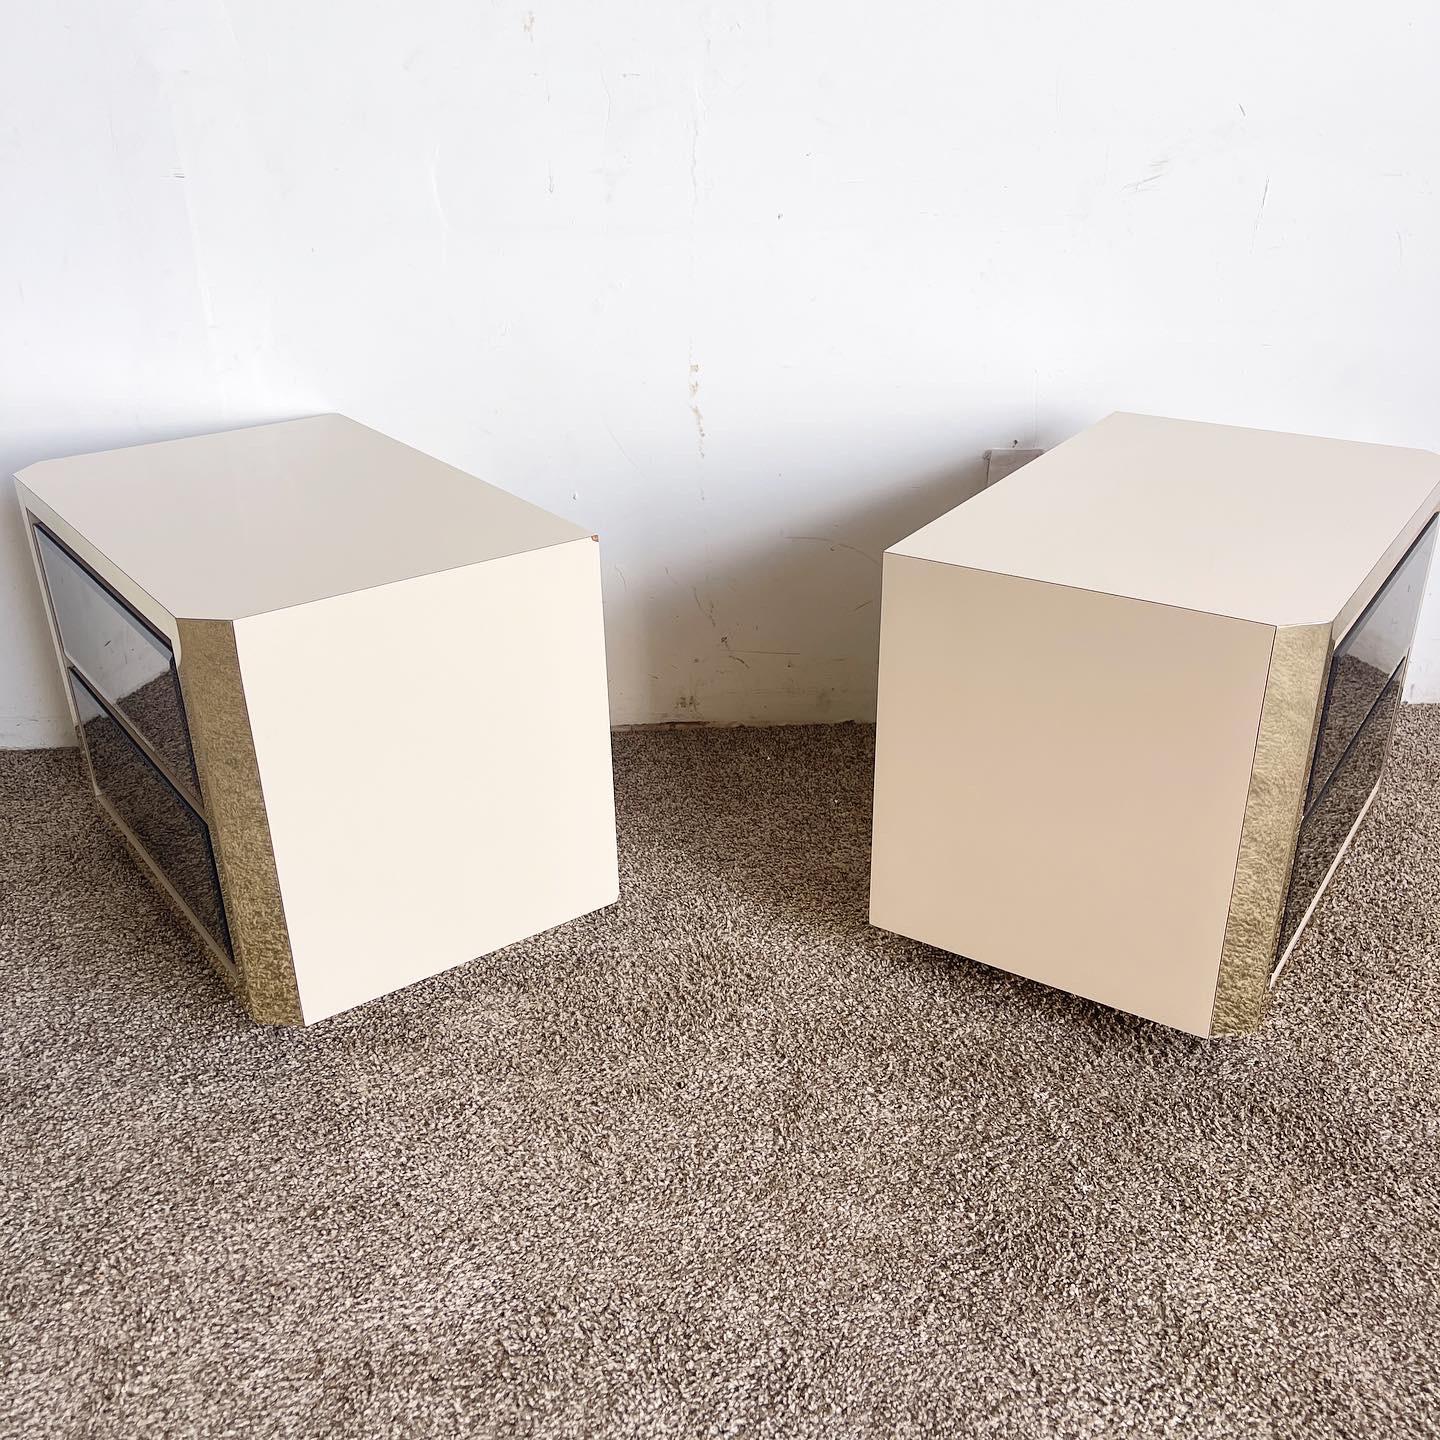 Upgrade your bedroom decor with our stunning Vintage Postmodern Nightstands. These nightstands, featuring smoked beveled mirror drawers, gold paneling, and a beige lacquer laminate finish, offer a fusion of elegance and practicality. Ideal for